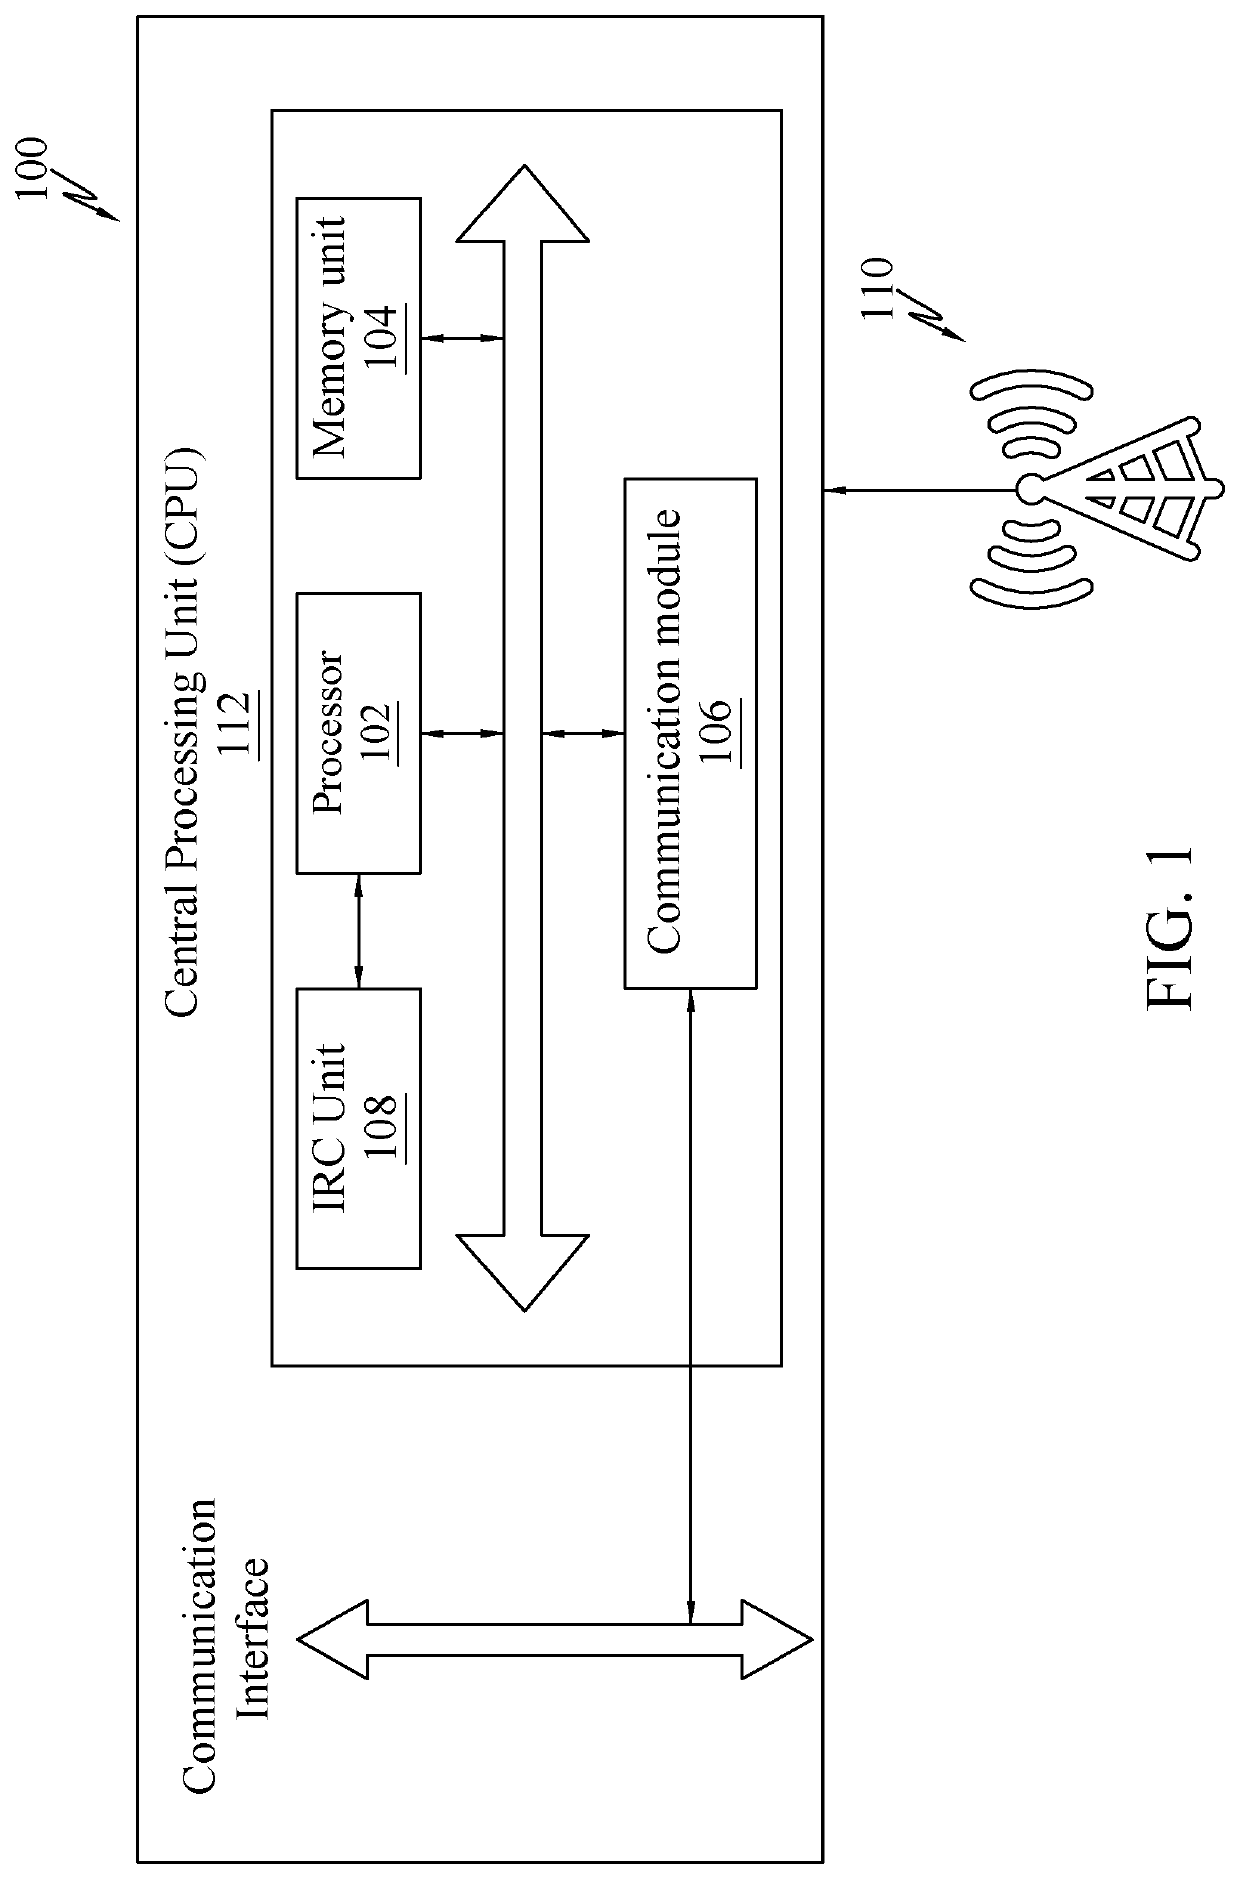 Method for improving signal to noise ratio in an uplink transmission